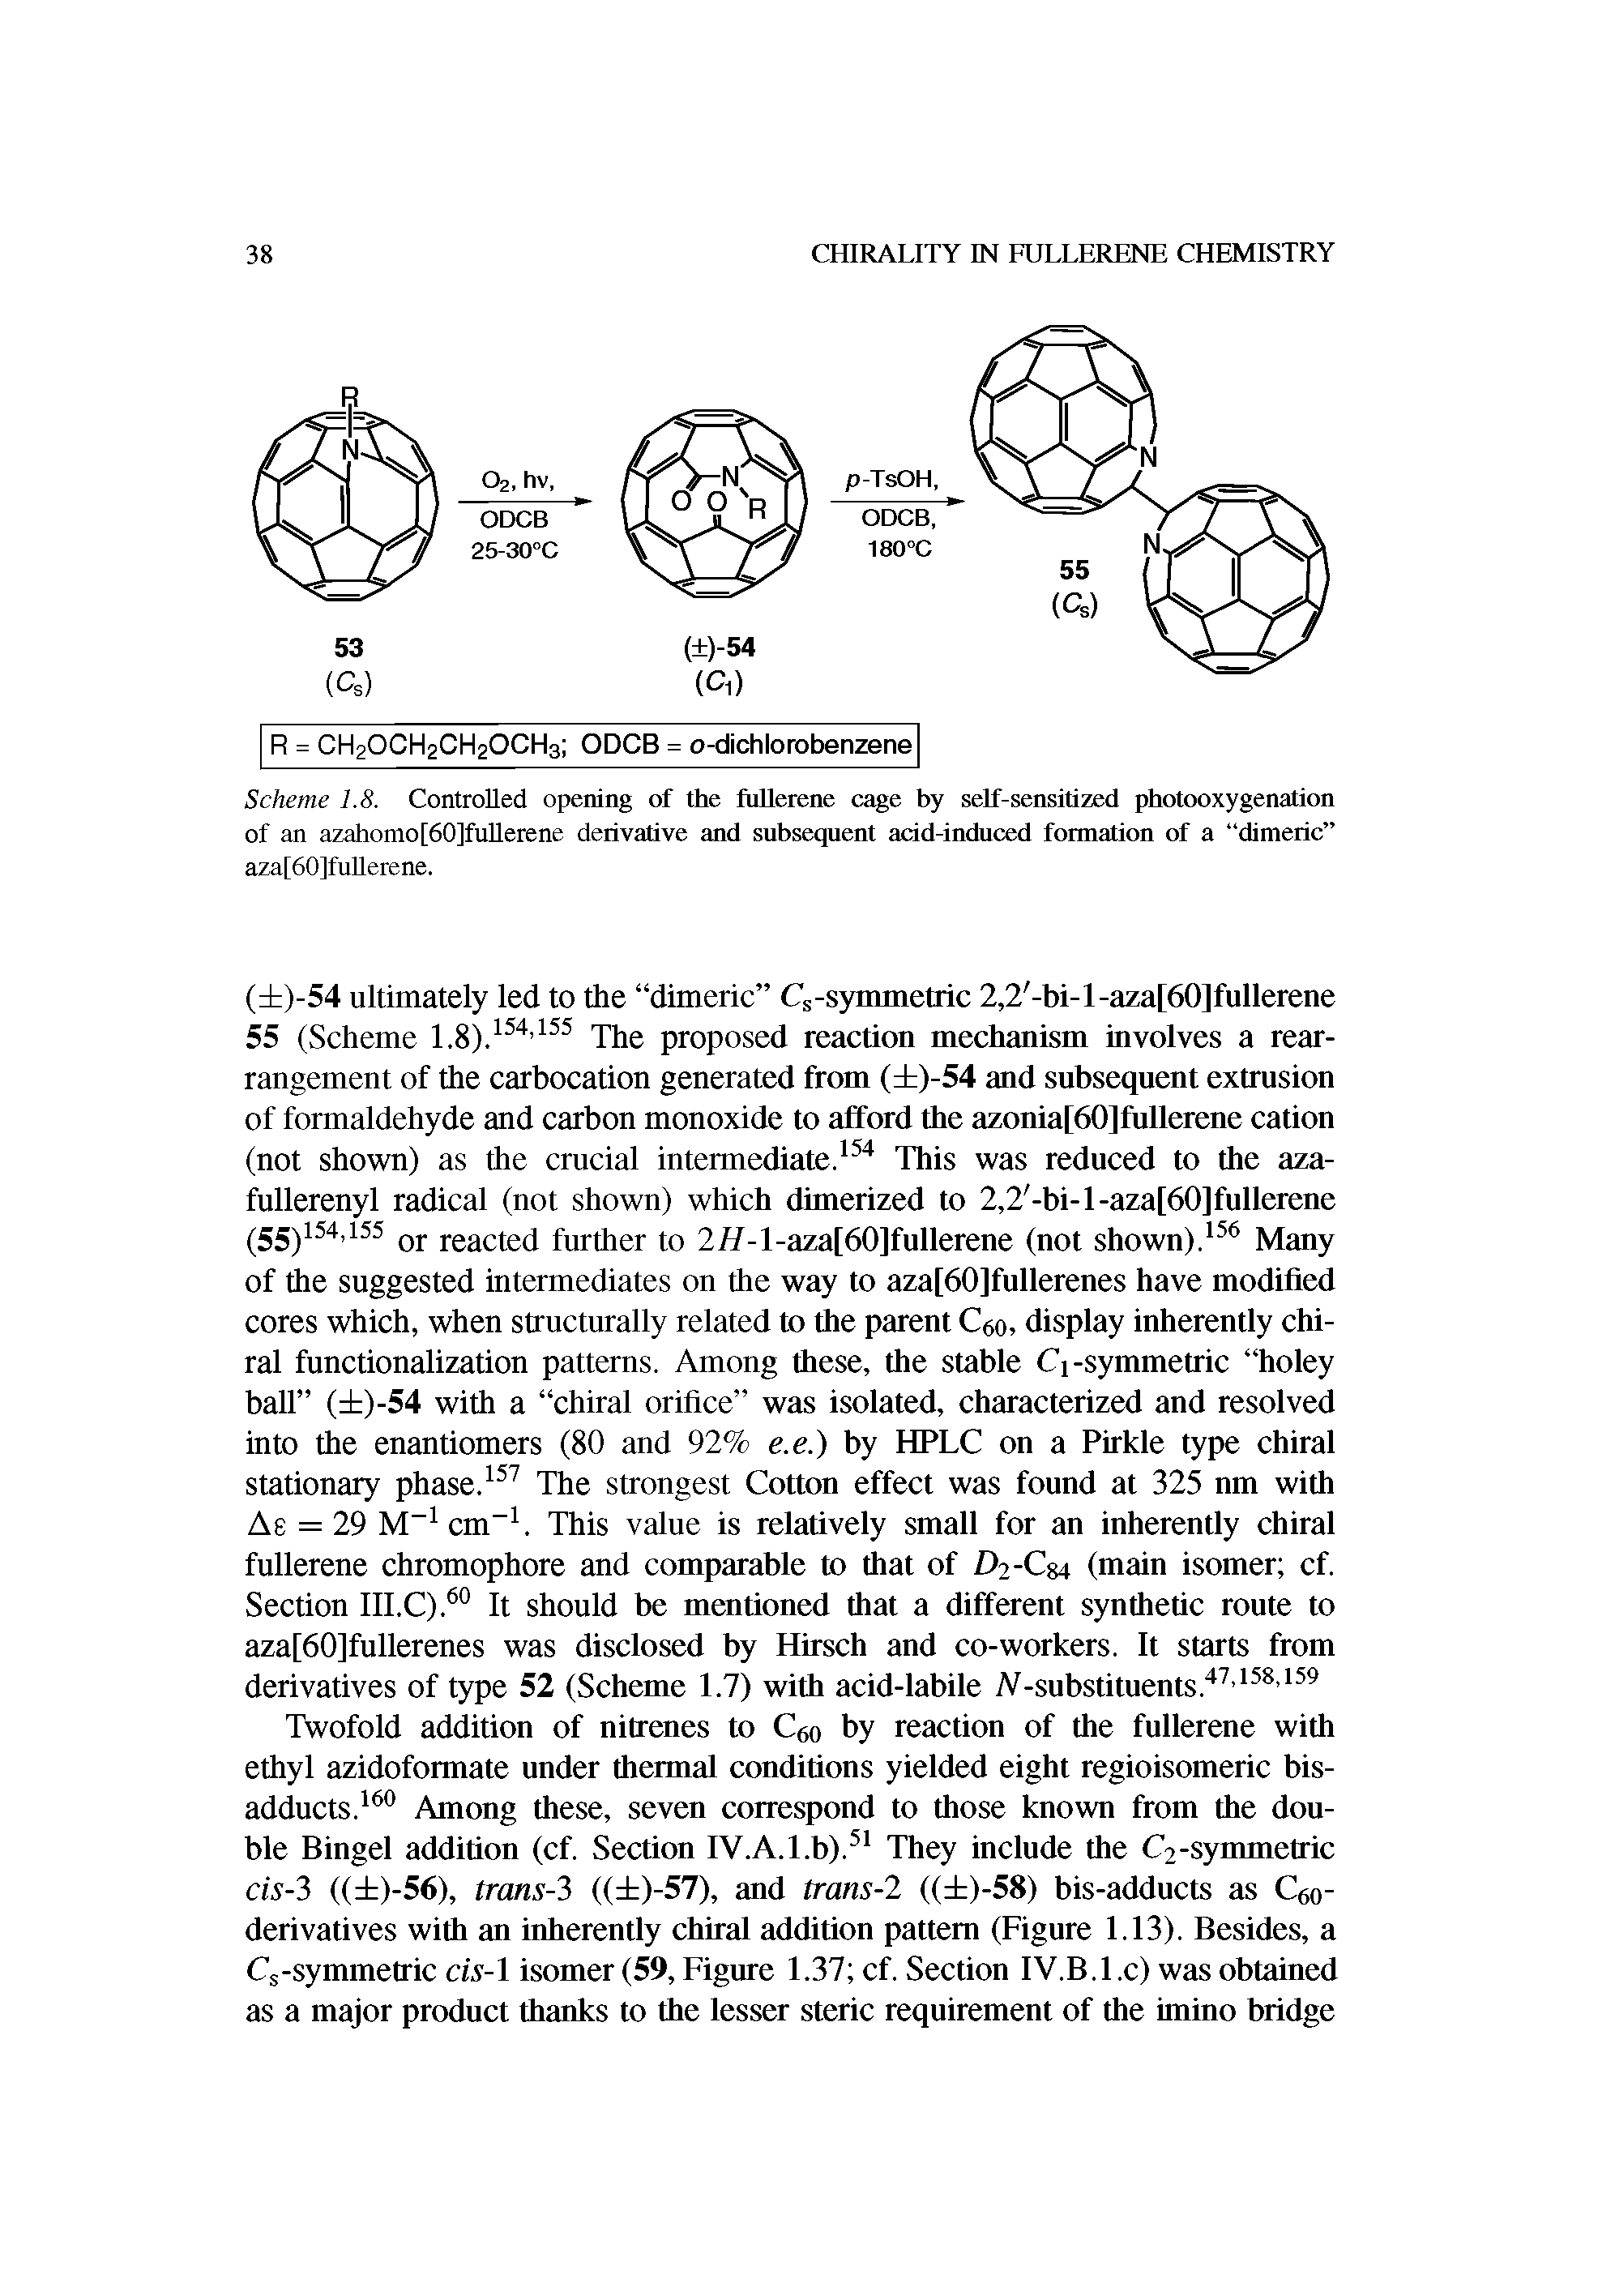 Scheme 1.8. Controlled opening of the fullerene cage by self-sensitized photooxygenation of an azahomo[60]fullerene derivative and subsequent add-induced formation of a dimeric aza[60]fullerene.